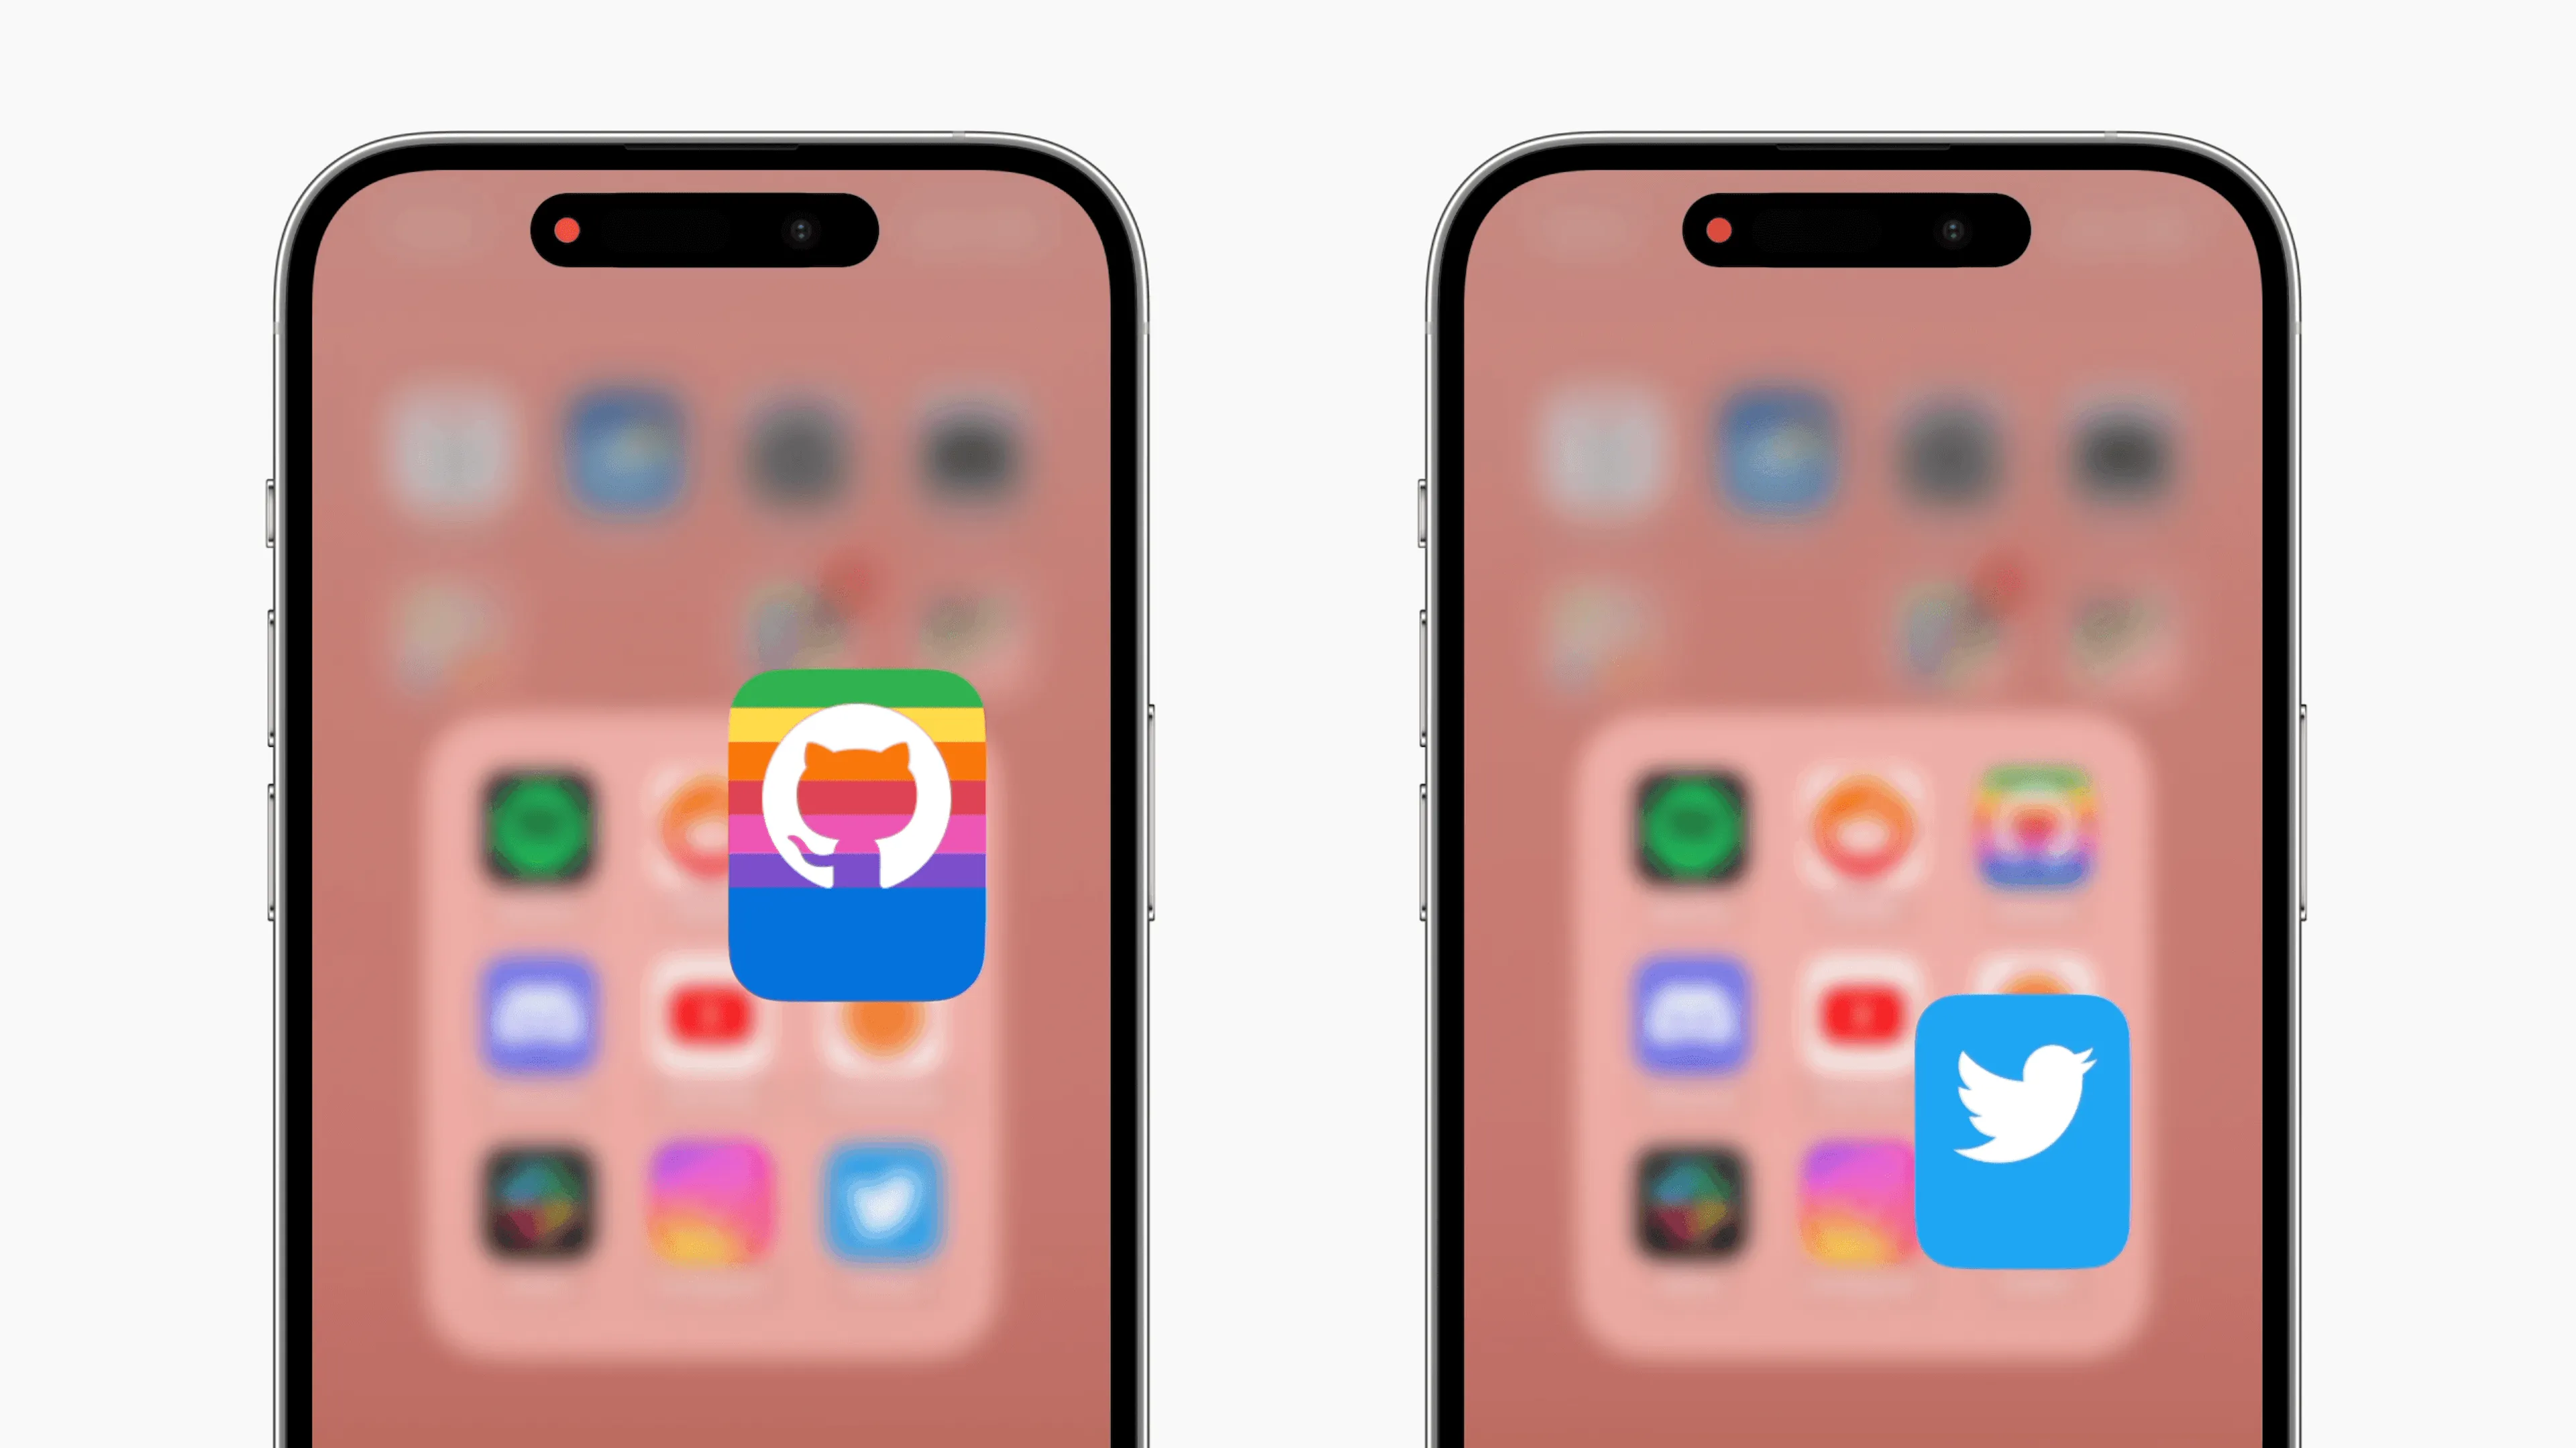 Two app icons are in focus, both of them have the bottom 10 points duplicated and stretched for an elongated effect.